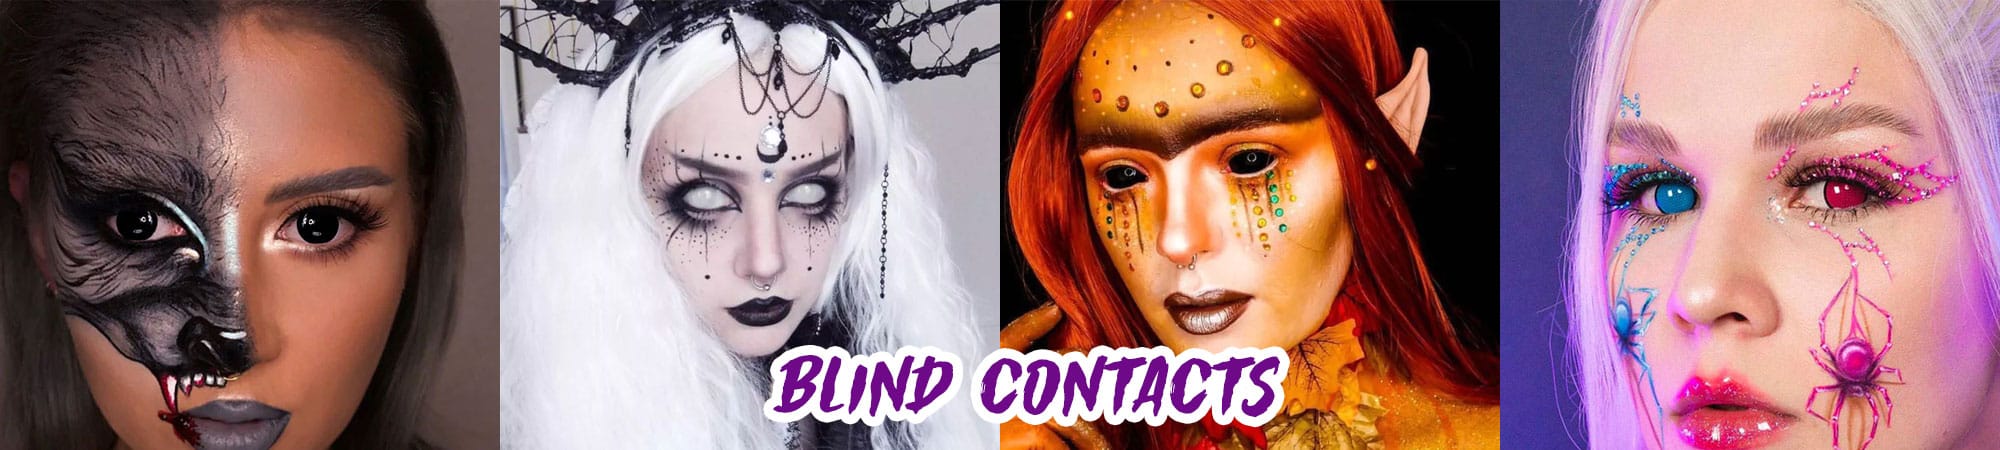 Blind Contacts